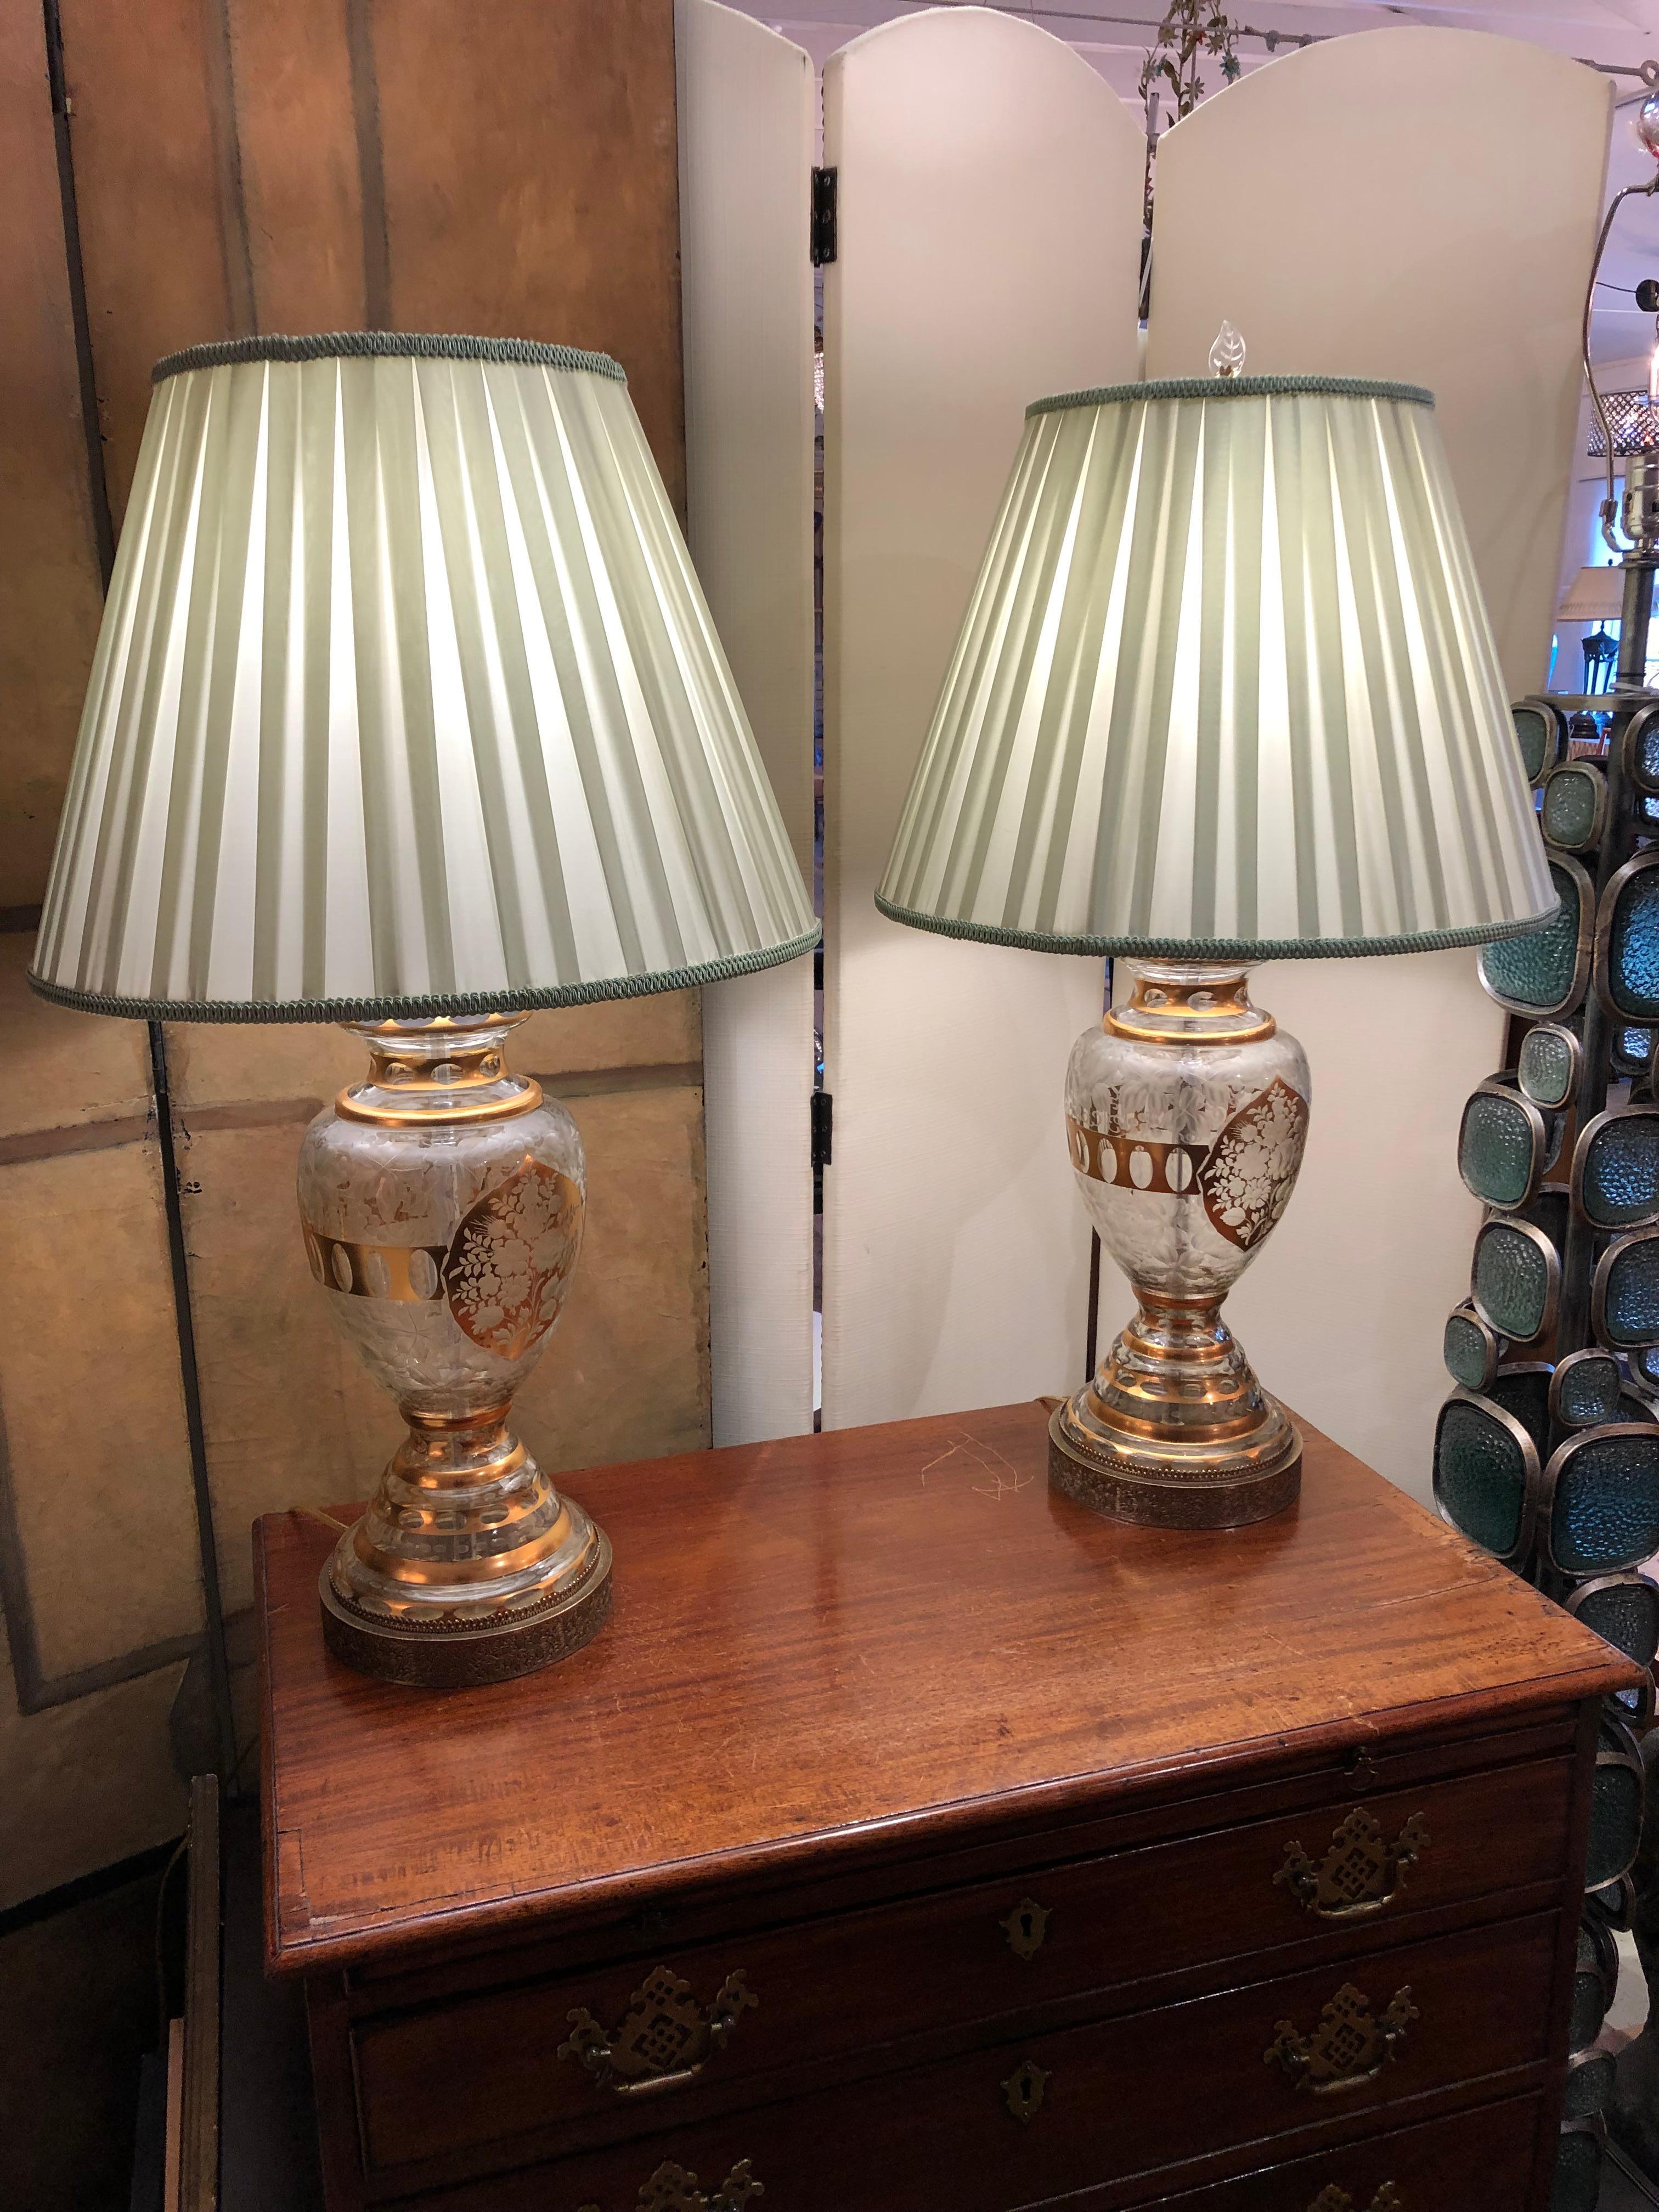 Impressive glamorous vintage crystal and metal lamps having ornate decoration, gilding on the crystal, and etched metal bases. Silk vintage shades included.
Measures: Base of lamp 7” diameter 
Shade: bottom 19” Diameter 13.75” High.